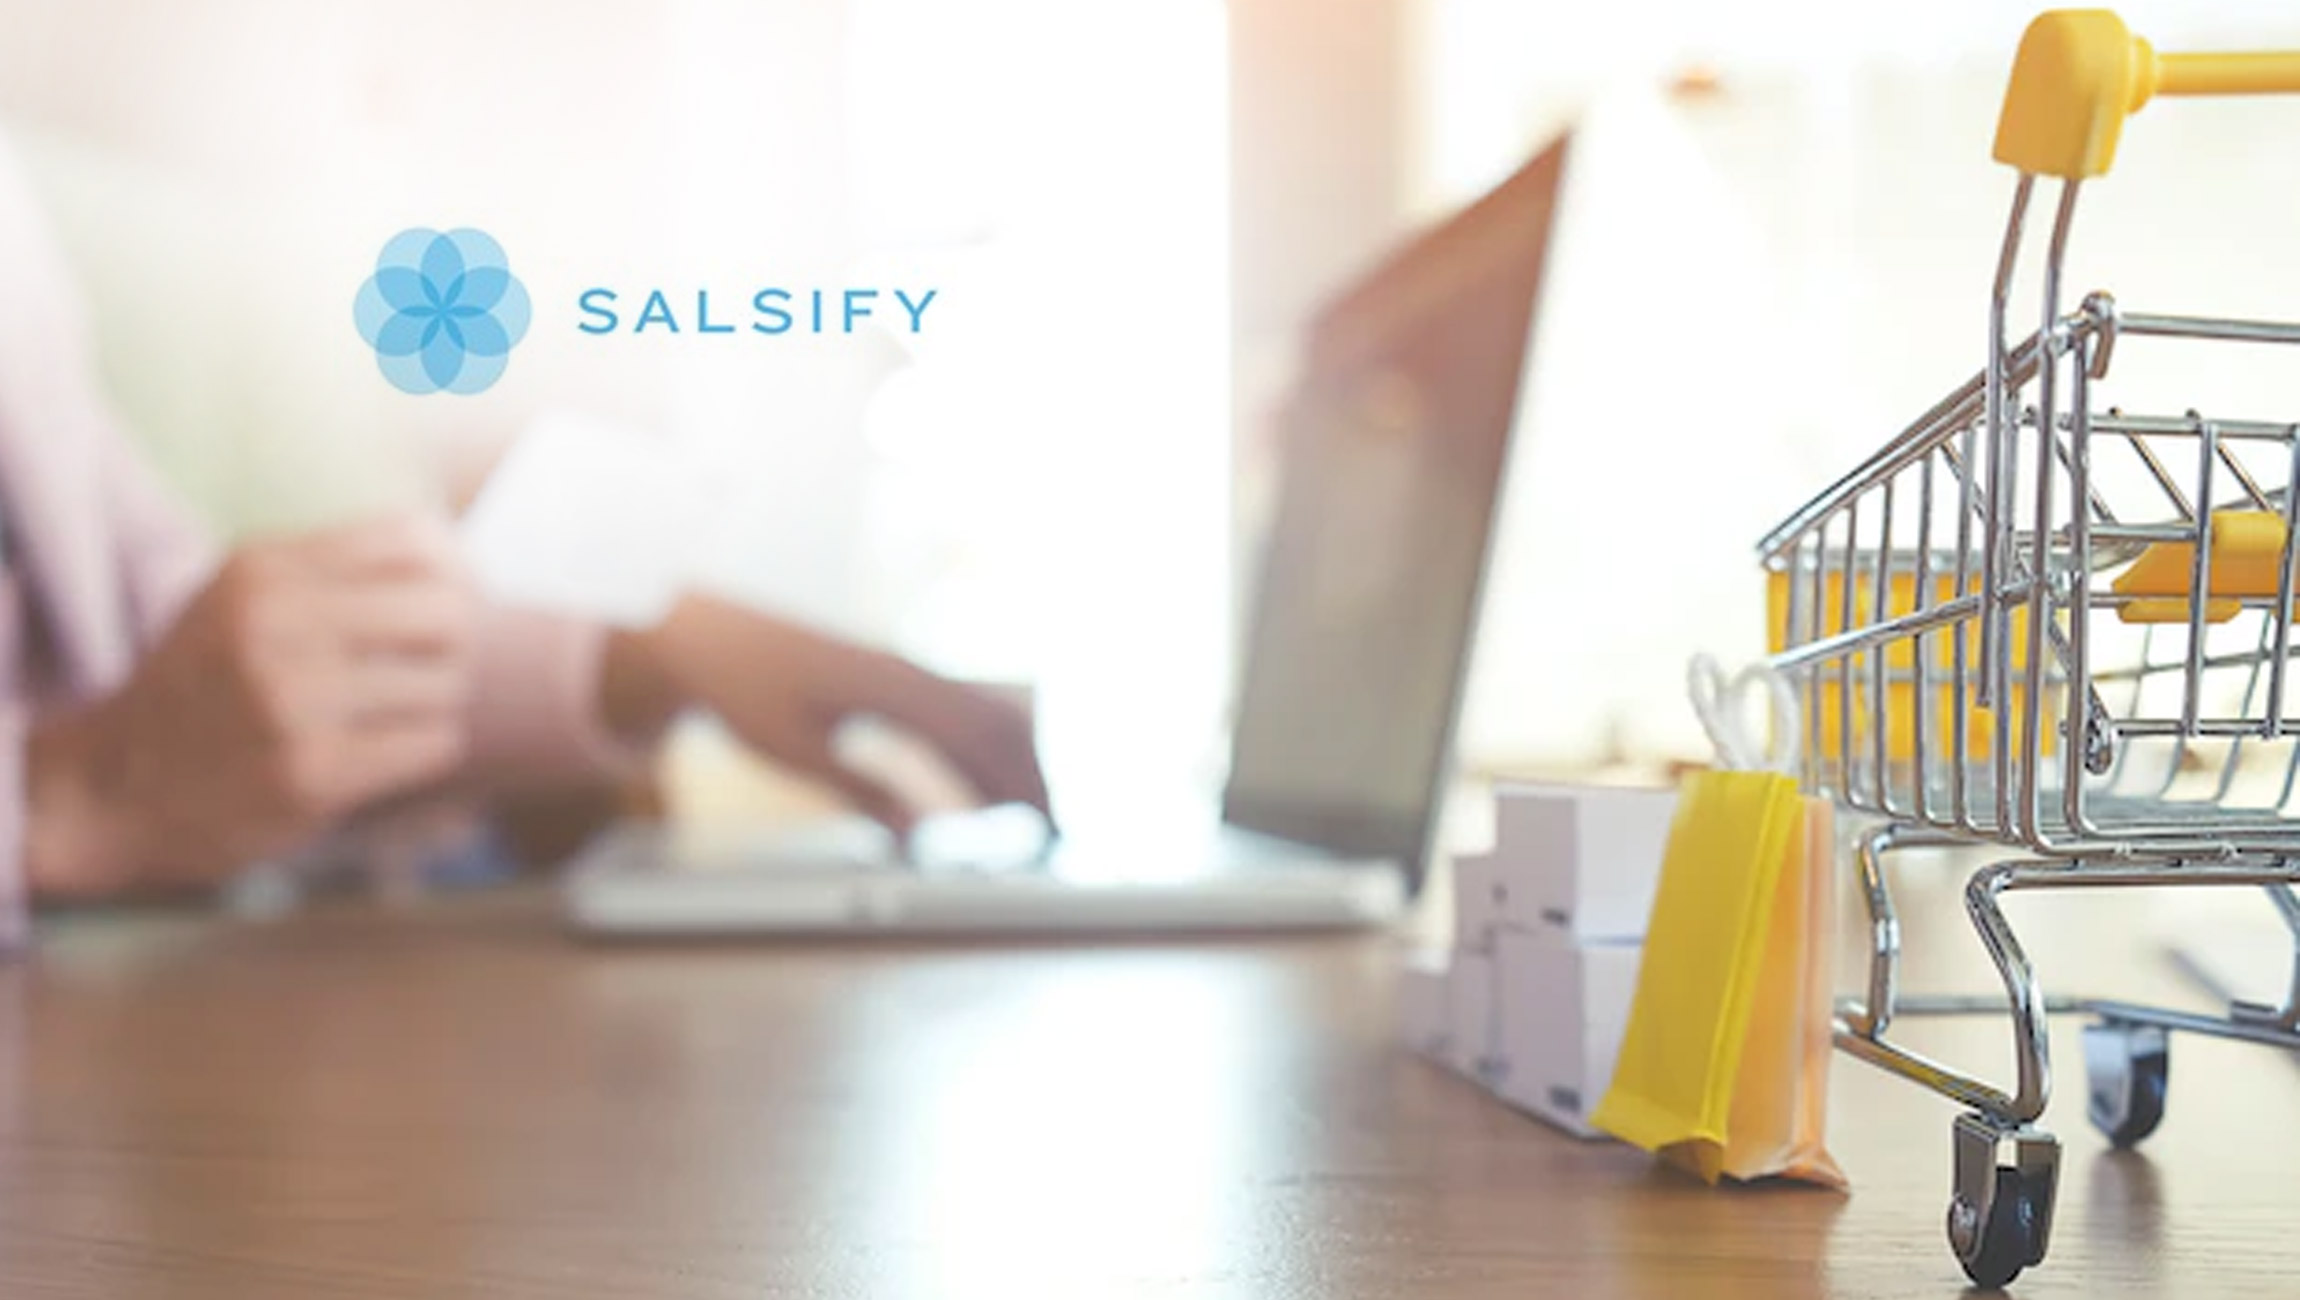 Salsify Modernizes Antiquated Product Libraries For the Digital Shelf